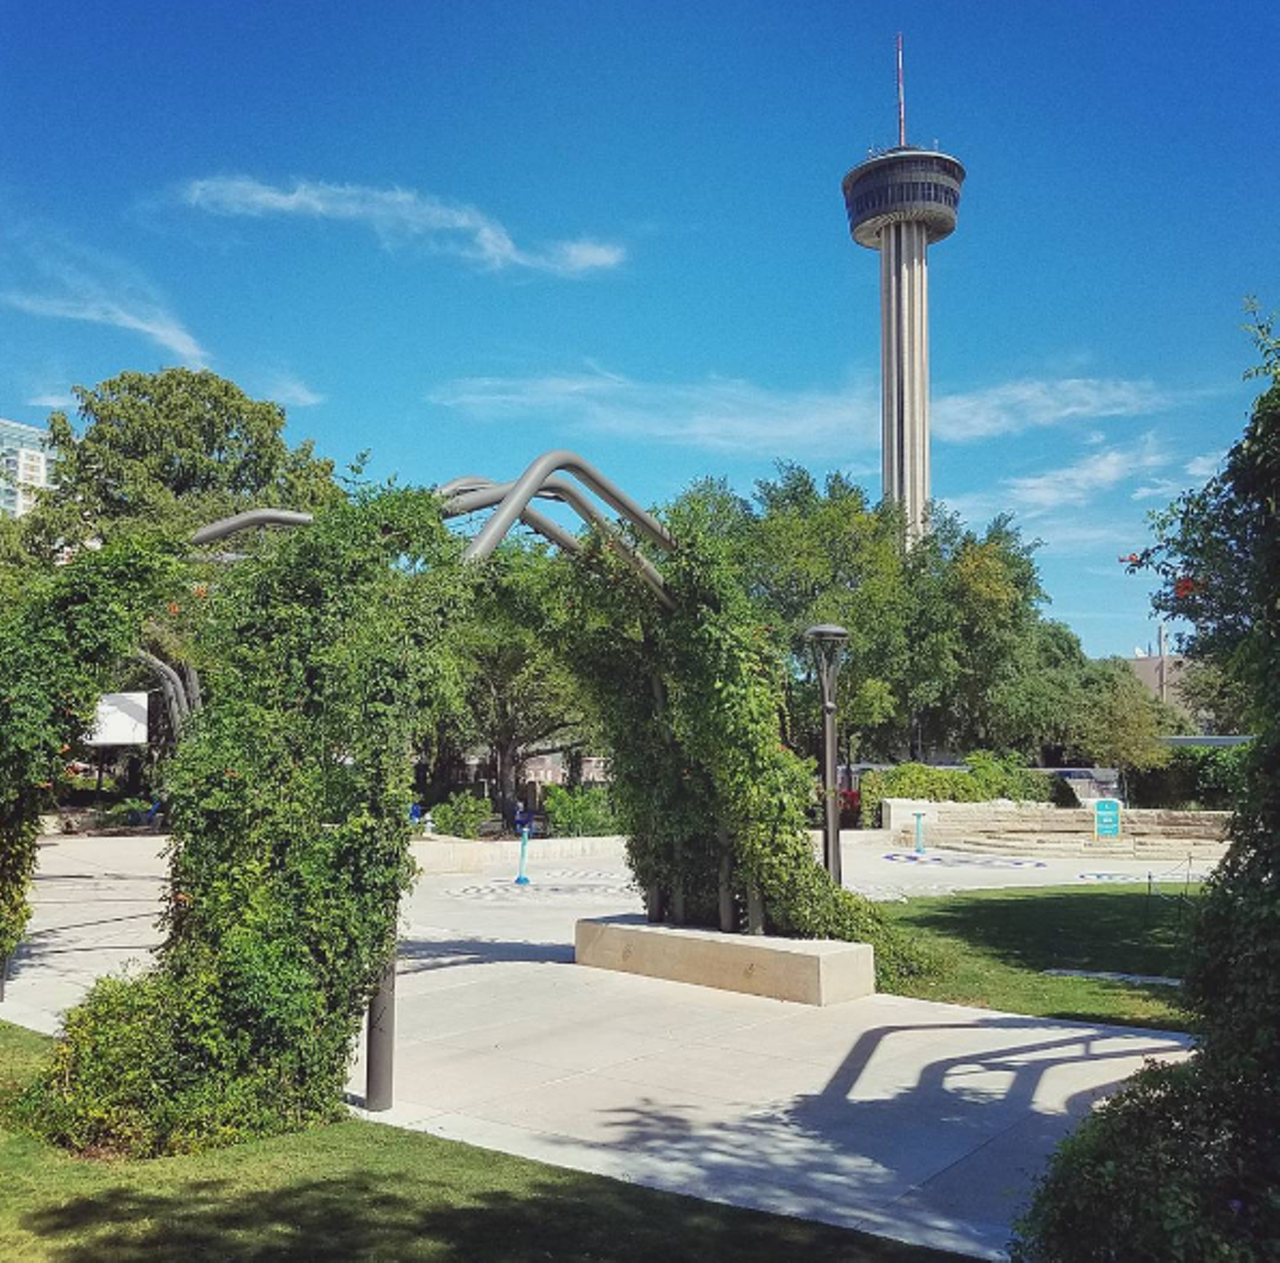 Release your inner child at the Yanaguana Gardens 
Hemisphere Park, 434 S. Alamo St.
Visit the playground and public art display at Hemisfair Park, pack a picnic or people-watch in the center of town.
Photo via Instagram, lovelulavida